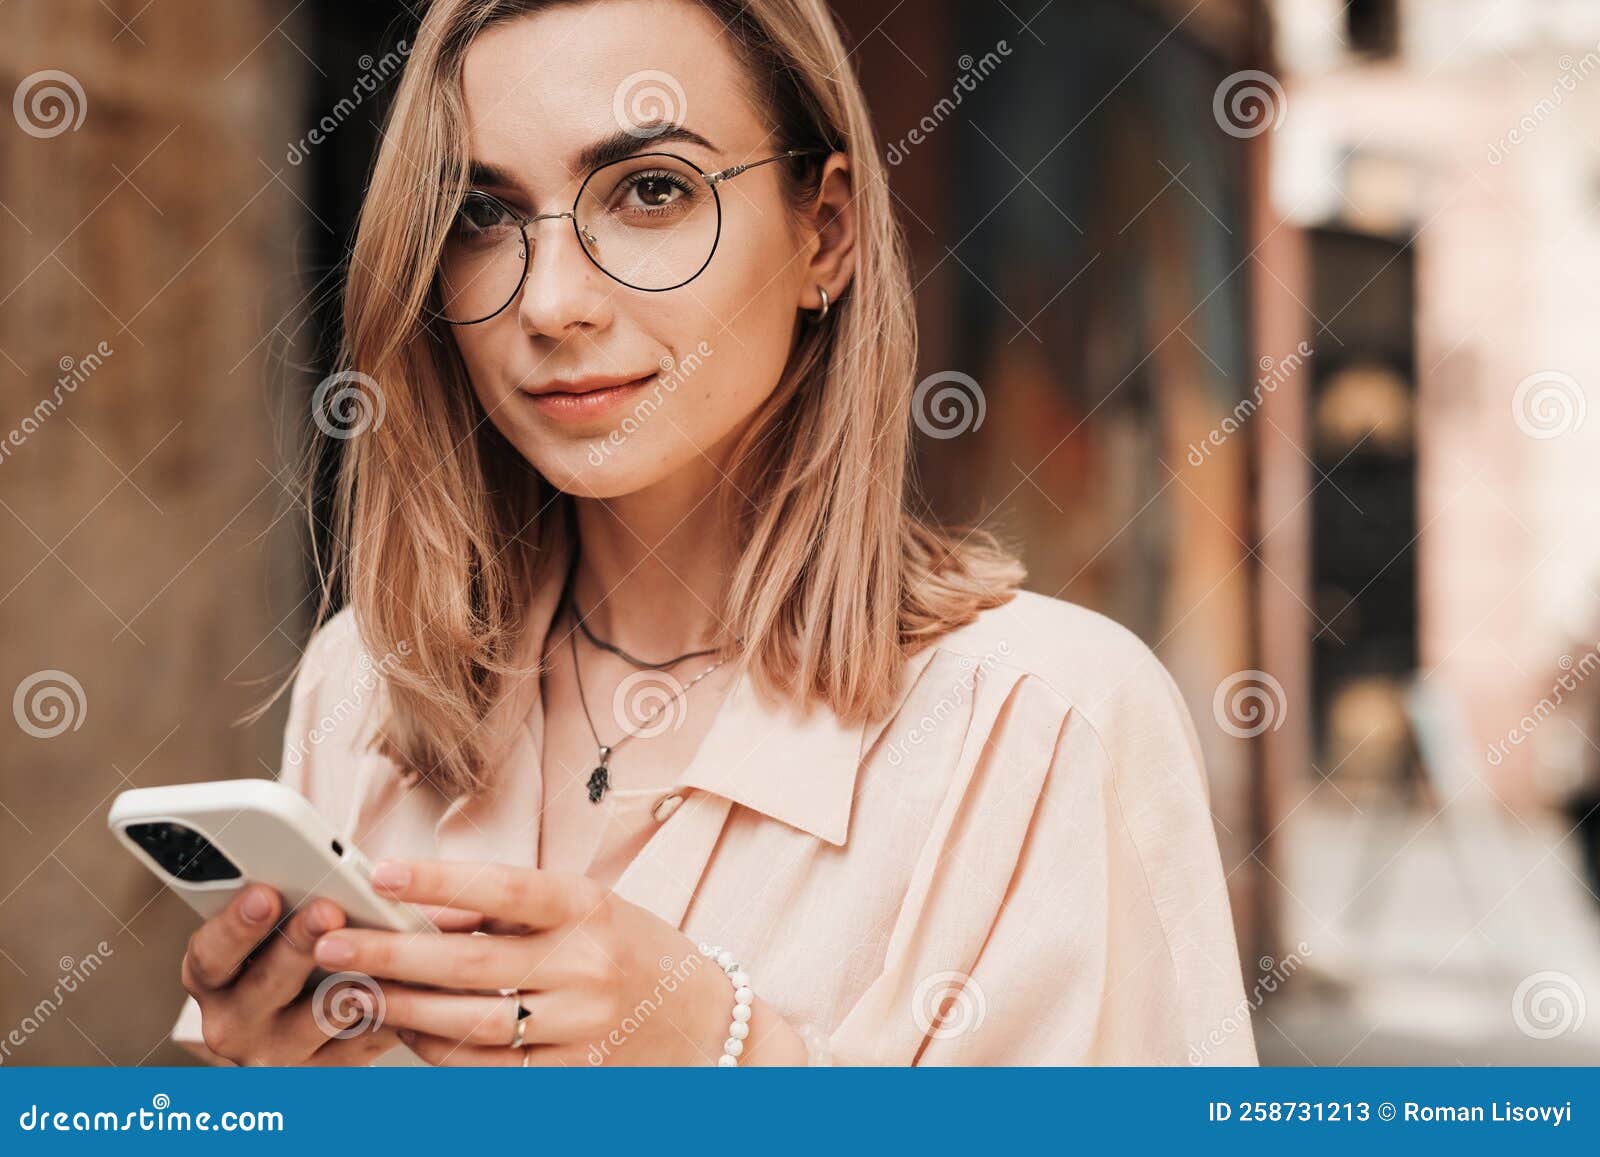 Close Up Portrait Of Confident Young Woman With Eyeglasses Texting On Smartphone While Walking 